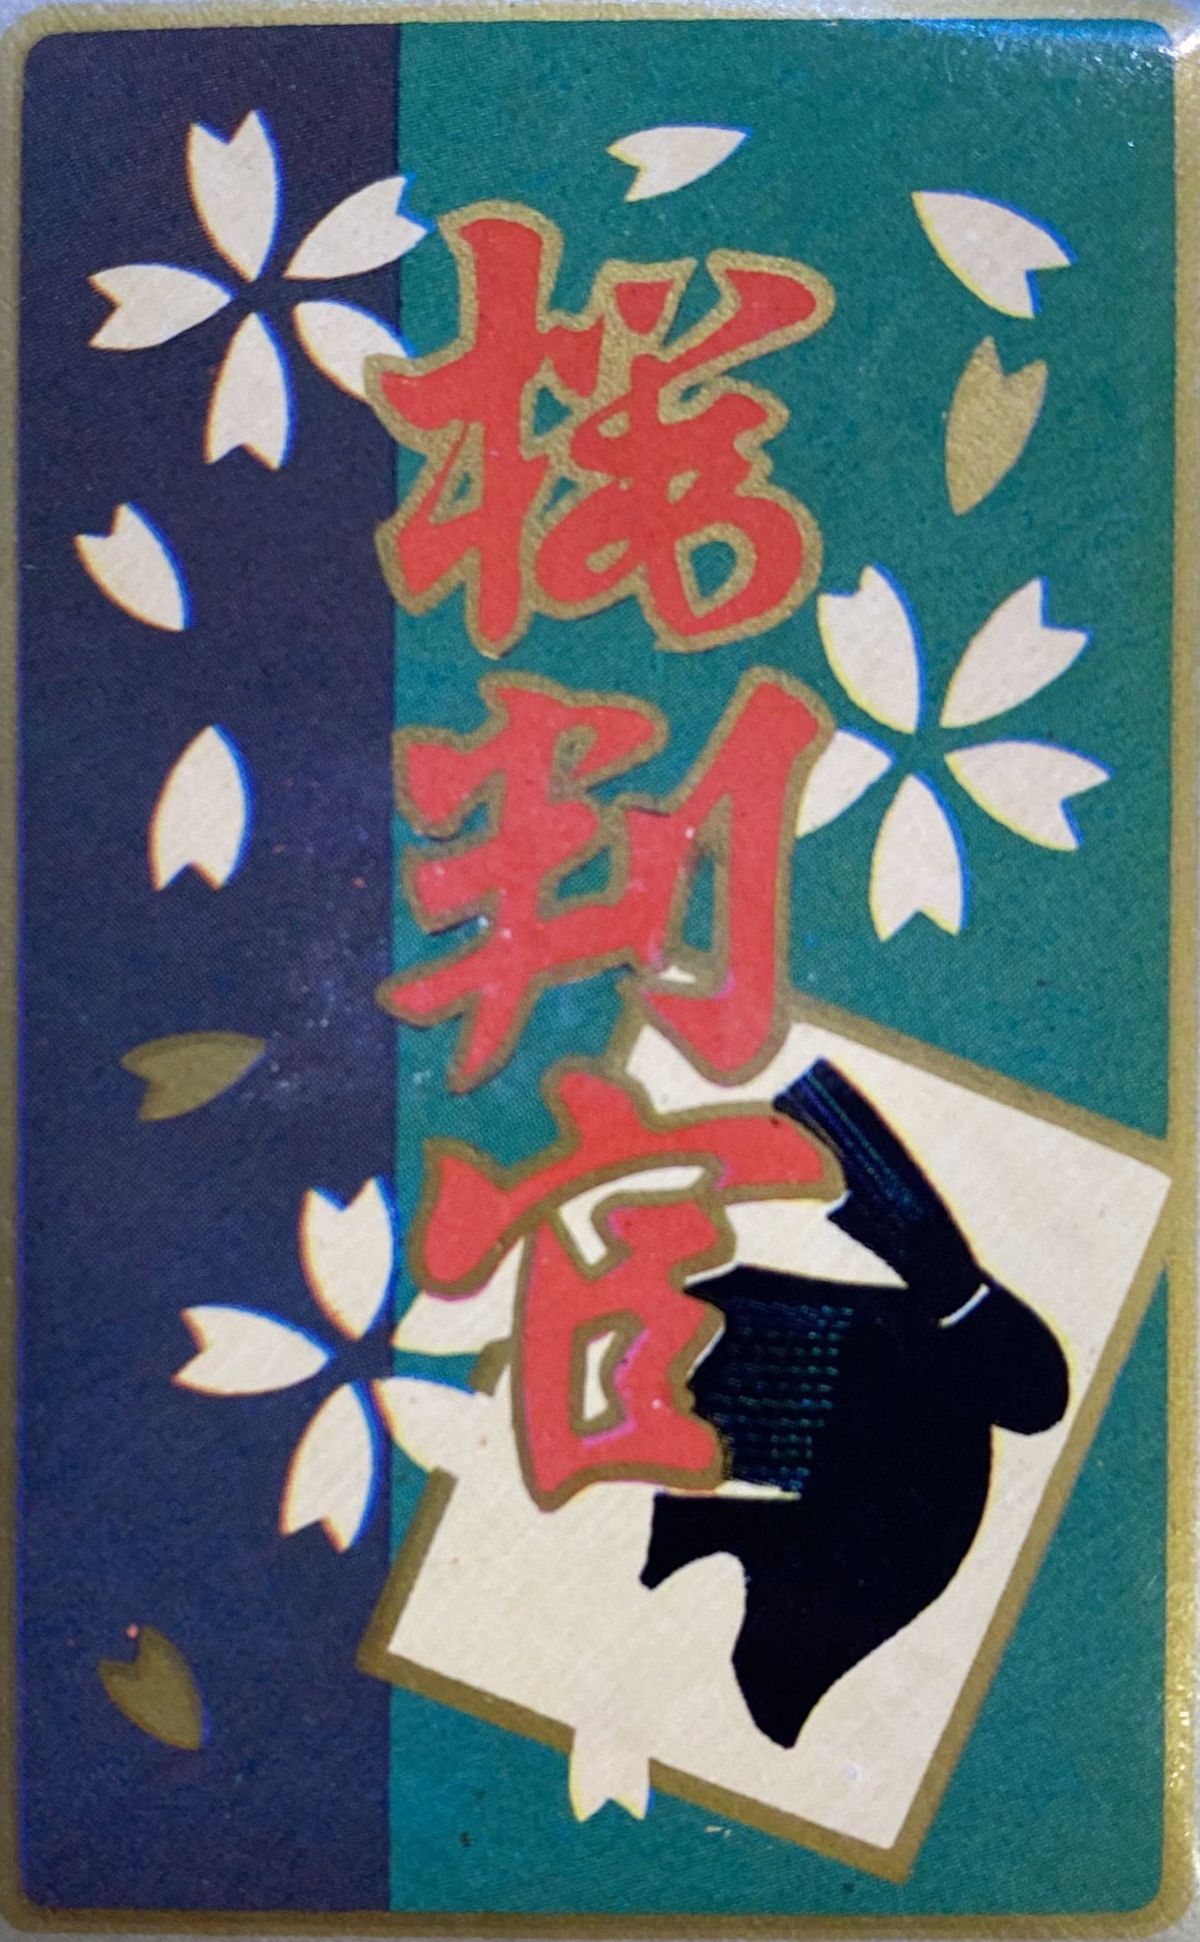 A hanafuda wrapper with an image of a Japanese judge’s haircut and cherry blossoms.